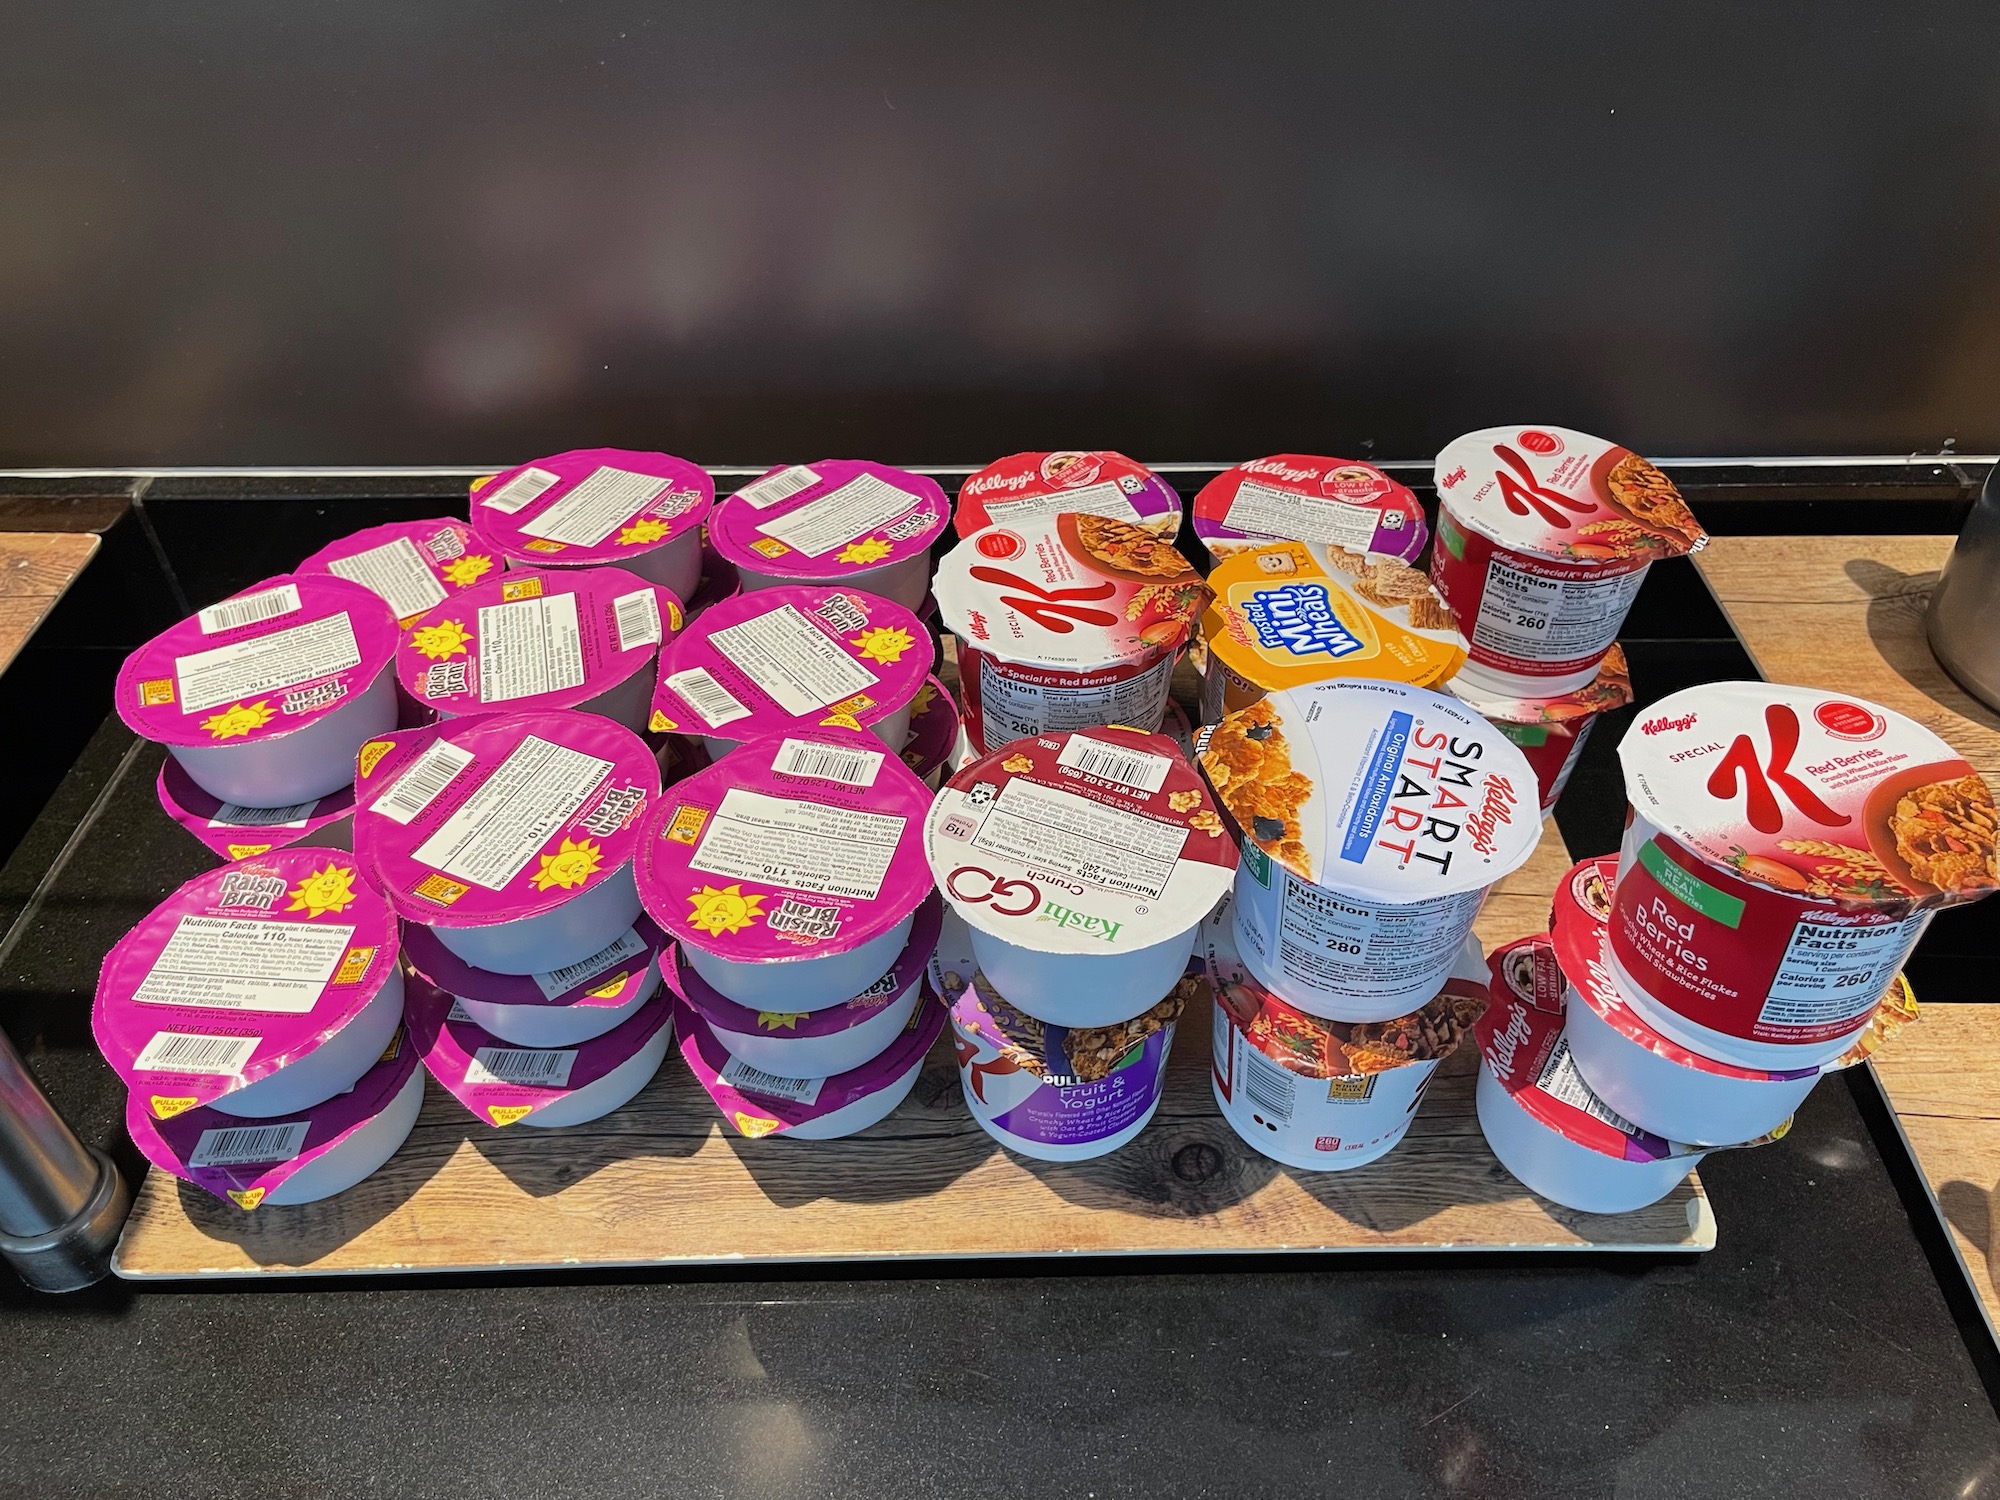 a group of yogurt containers on a wooden surface